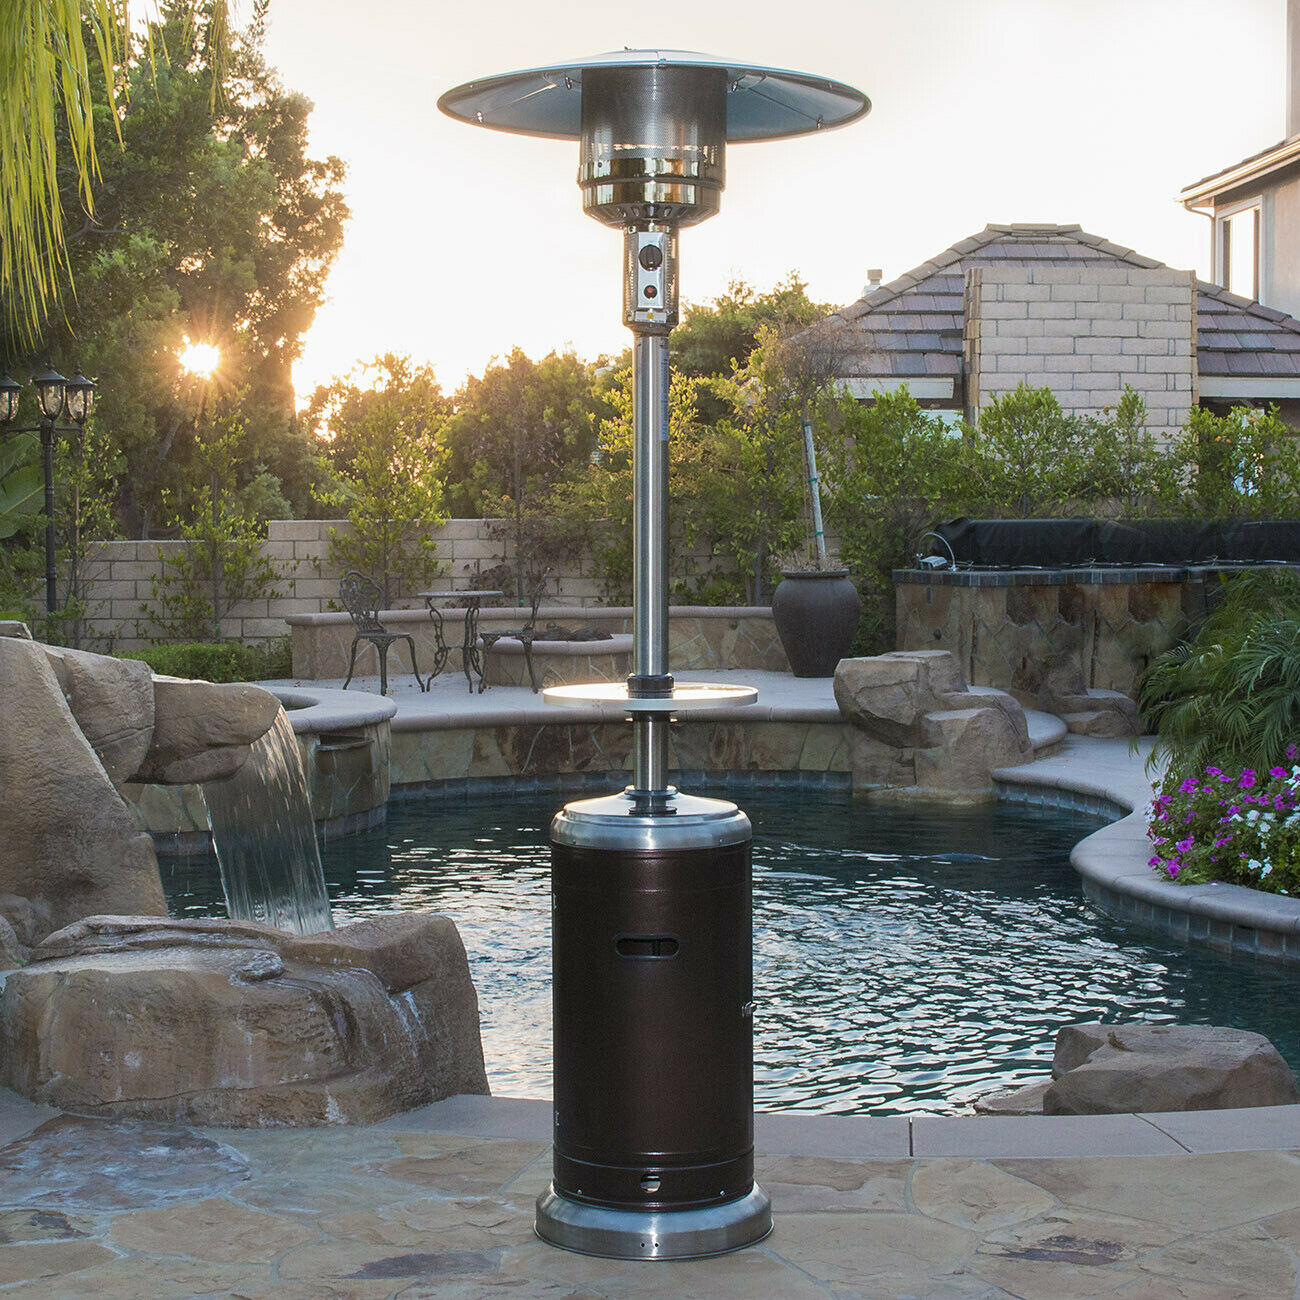 48000 Btu Propane Two Tone Patio Heater Deck And Table Lp Gas Hammered Bronze in dimensions 1300 X 1300